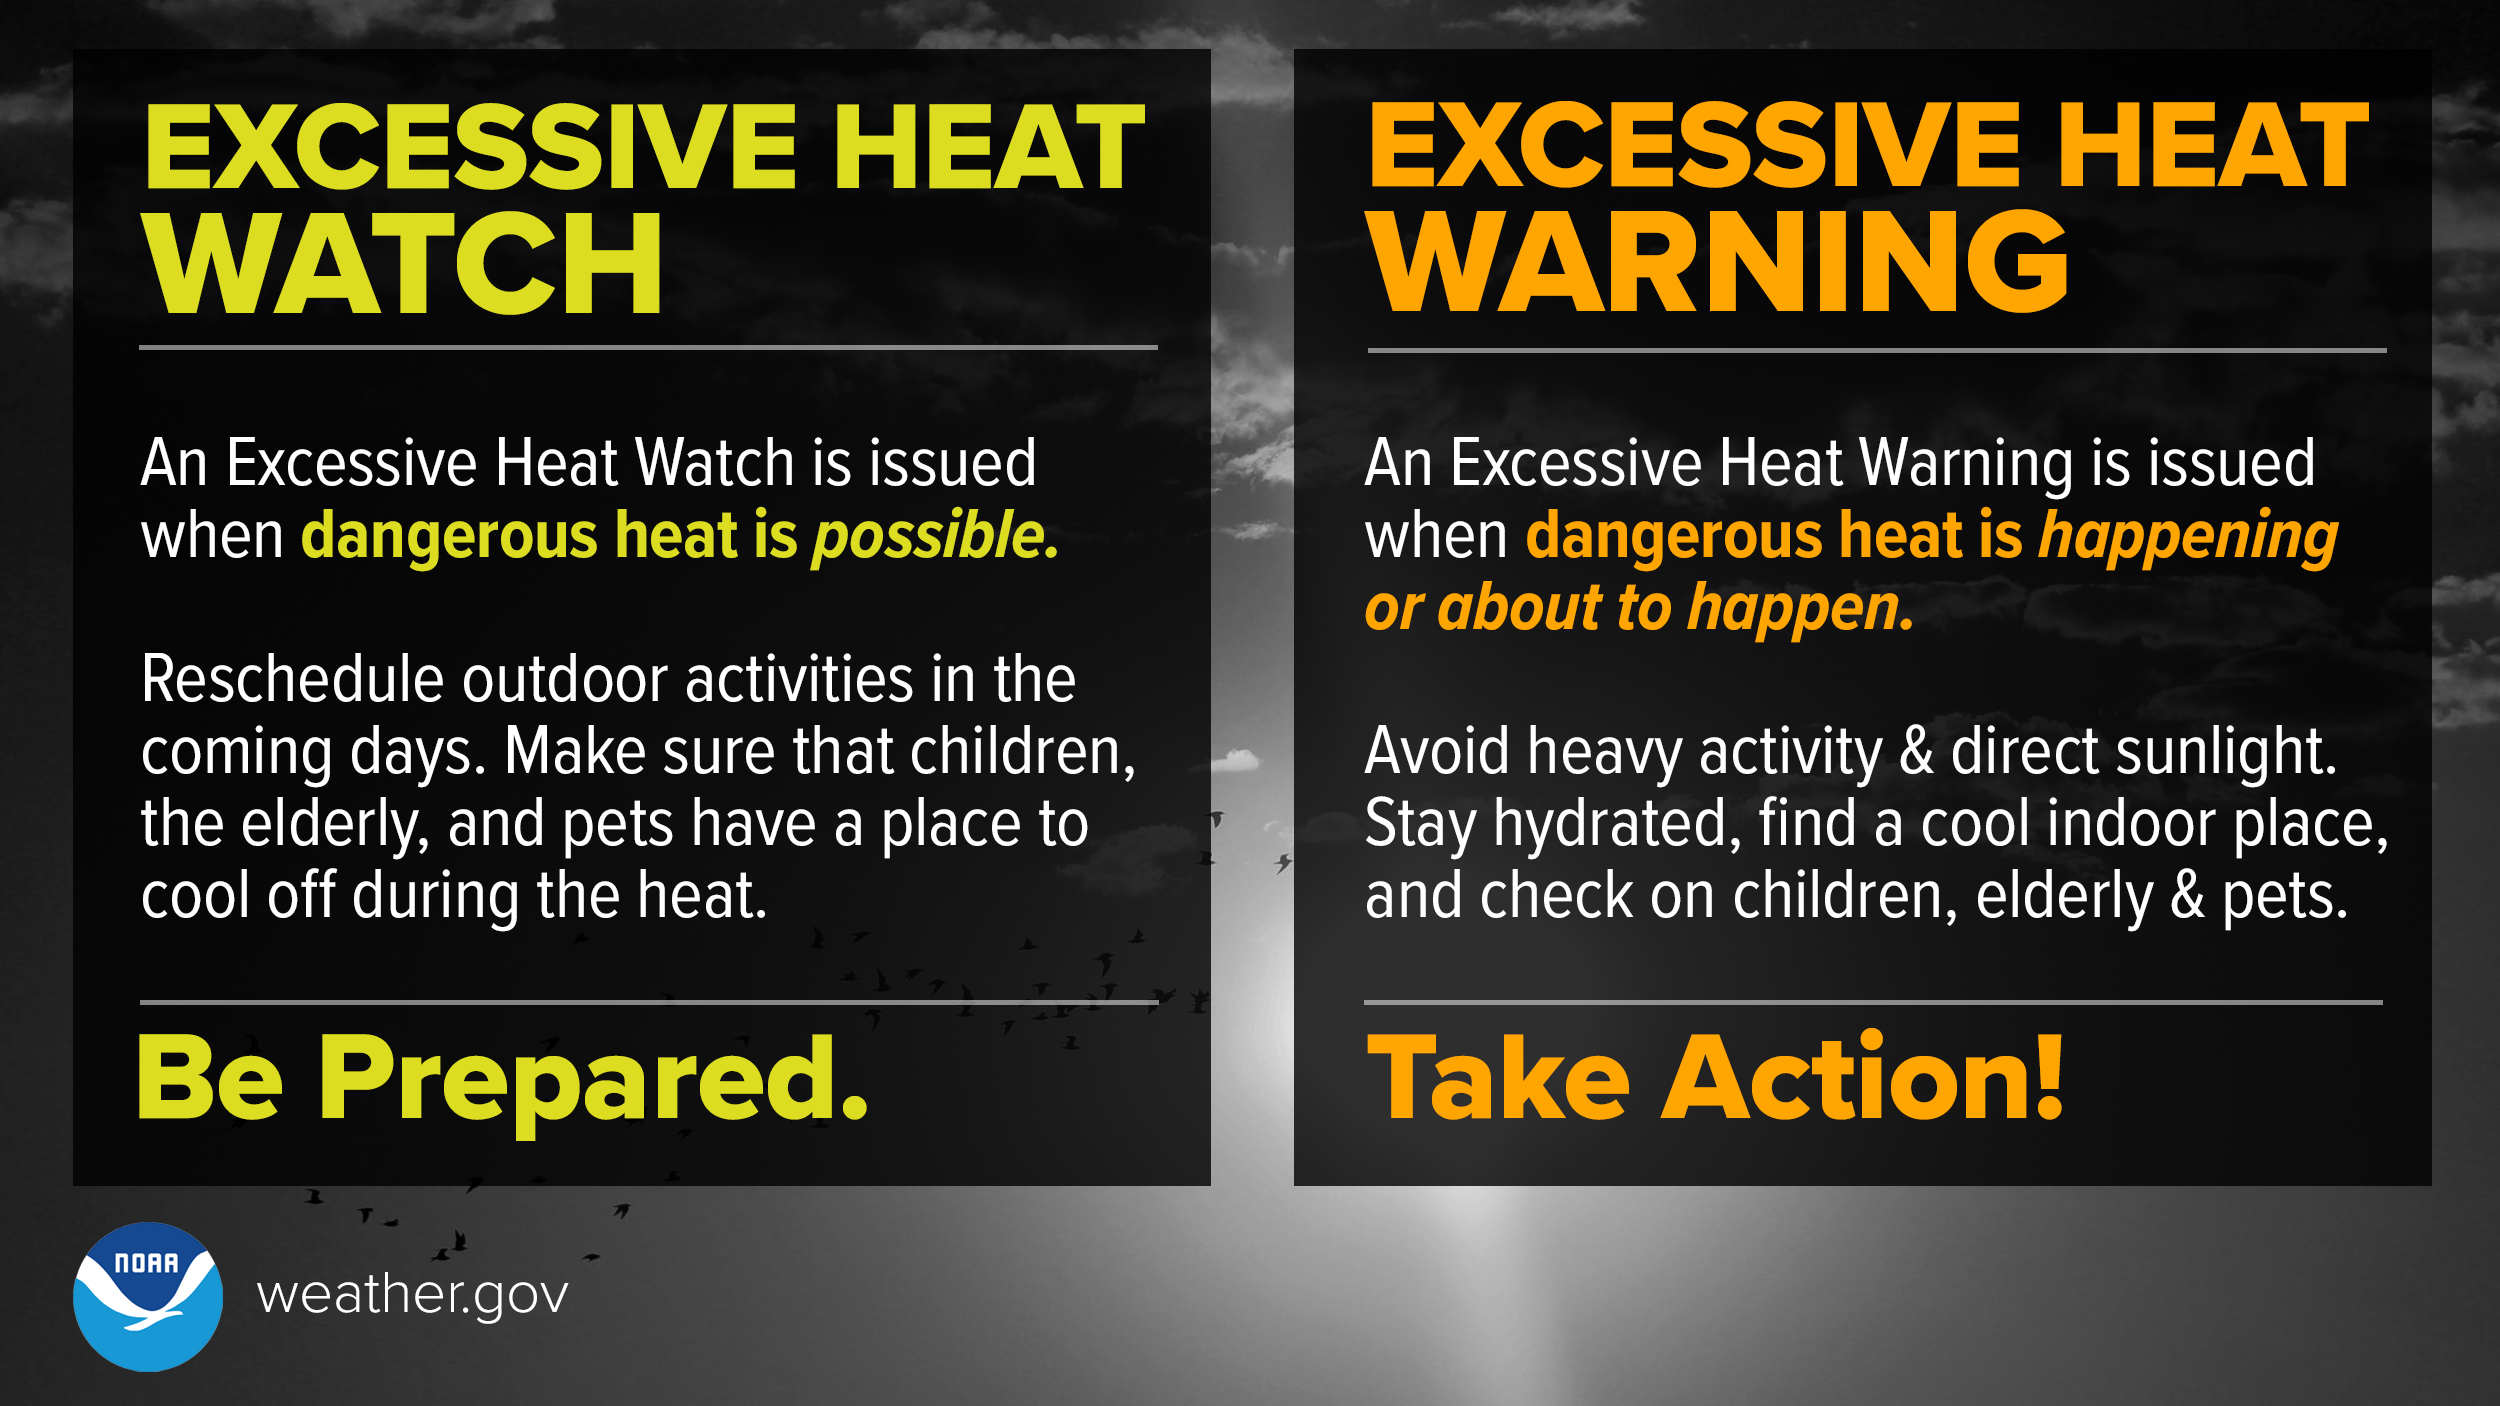 An Excessive Heat Watch means be prepared. An Excessive Heat Watch is issued when dangerous heat is possible. Reschedule outdoor activities in the coming days. Make sure that children, the elderly, and pets have a place to cool off during the heat. An Excessive Heat Warning means take action! An Excessive Heat Warning is issued when dangerous is happening or about to happen. Avoid heavy activity and direct sunlight. Stay hydrated, find a cool indoor place, and check on children, elderly and pets.